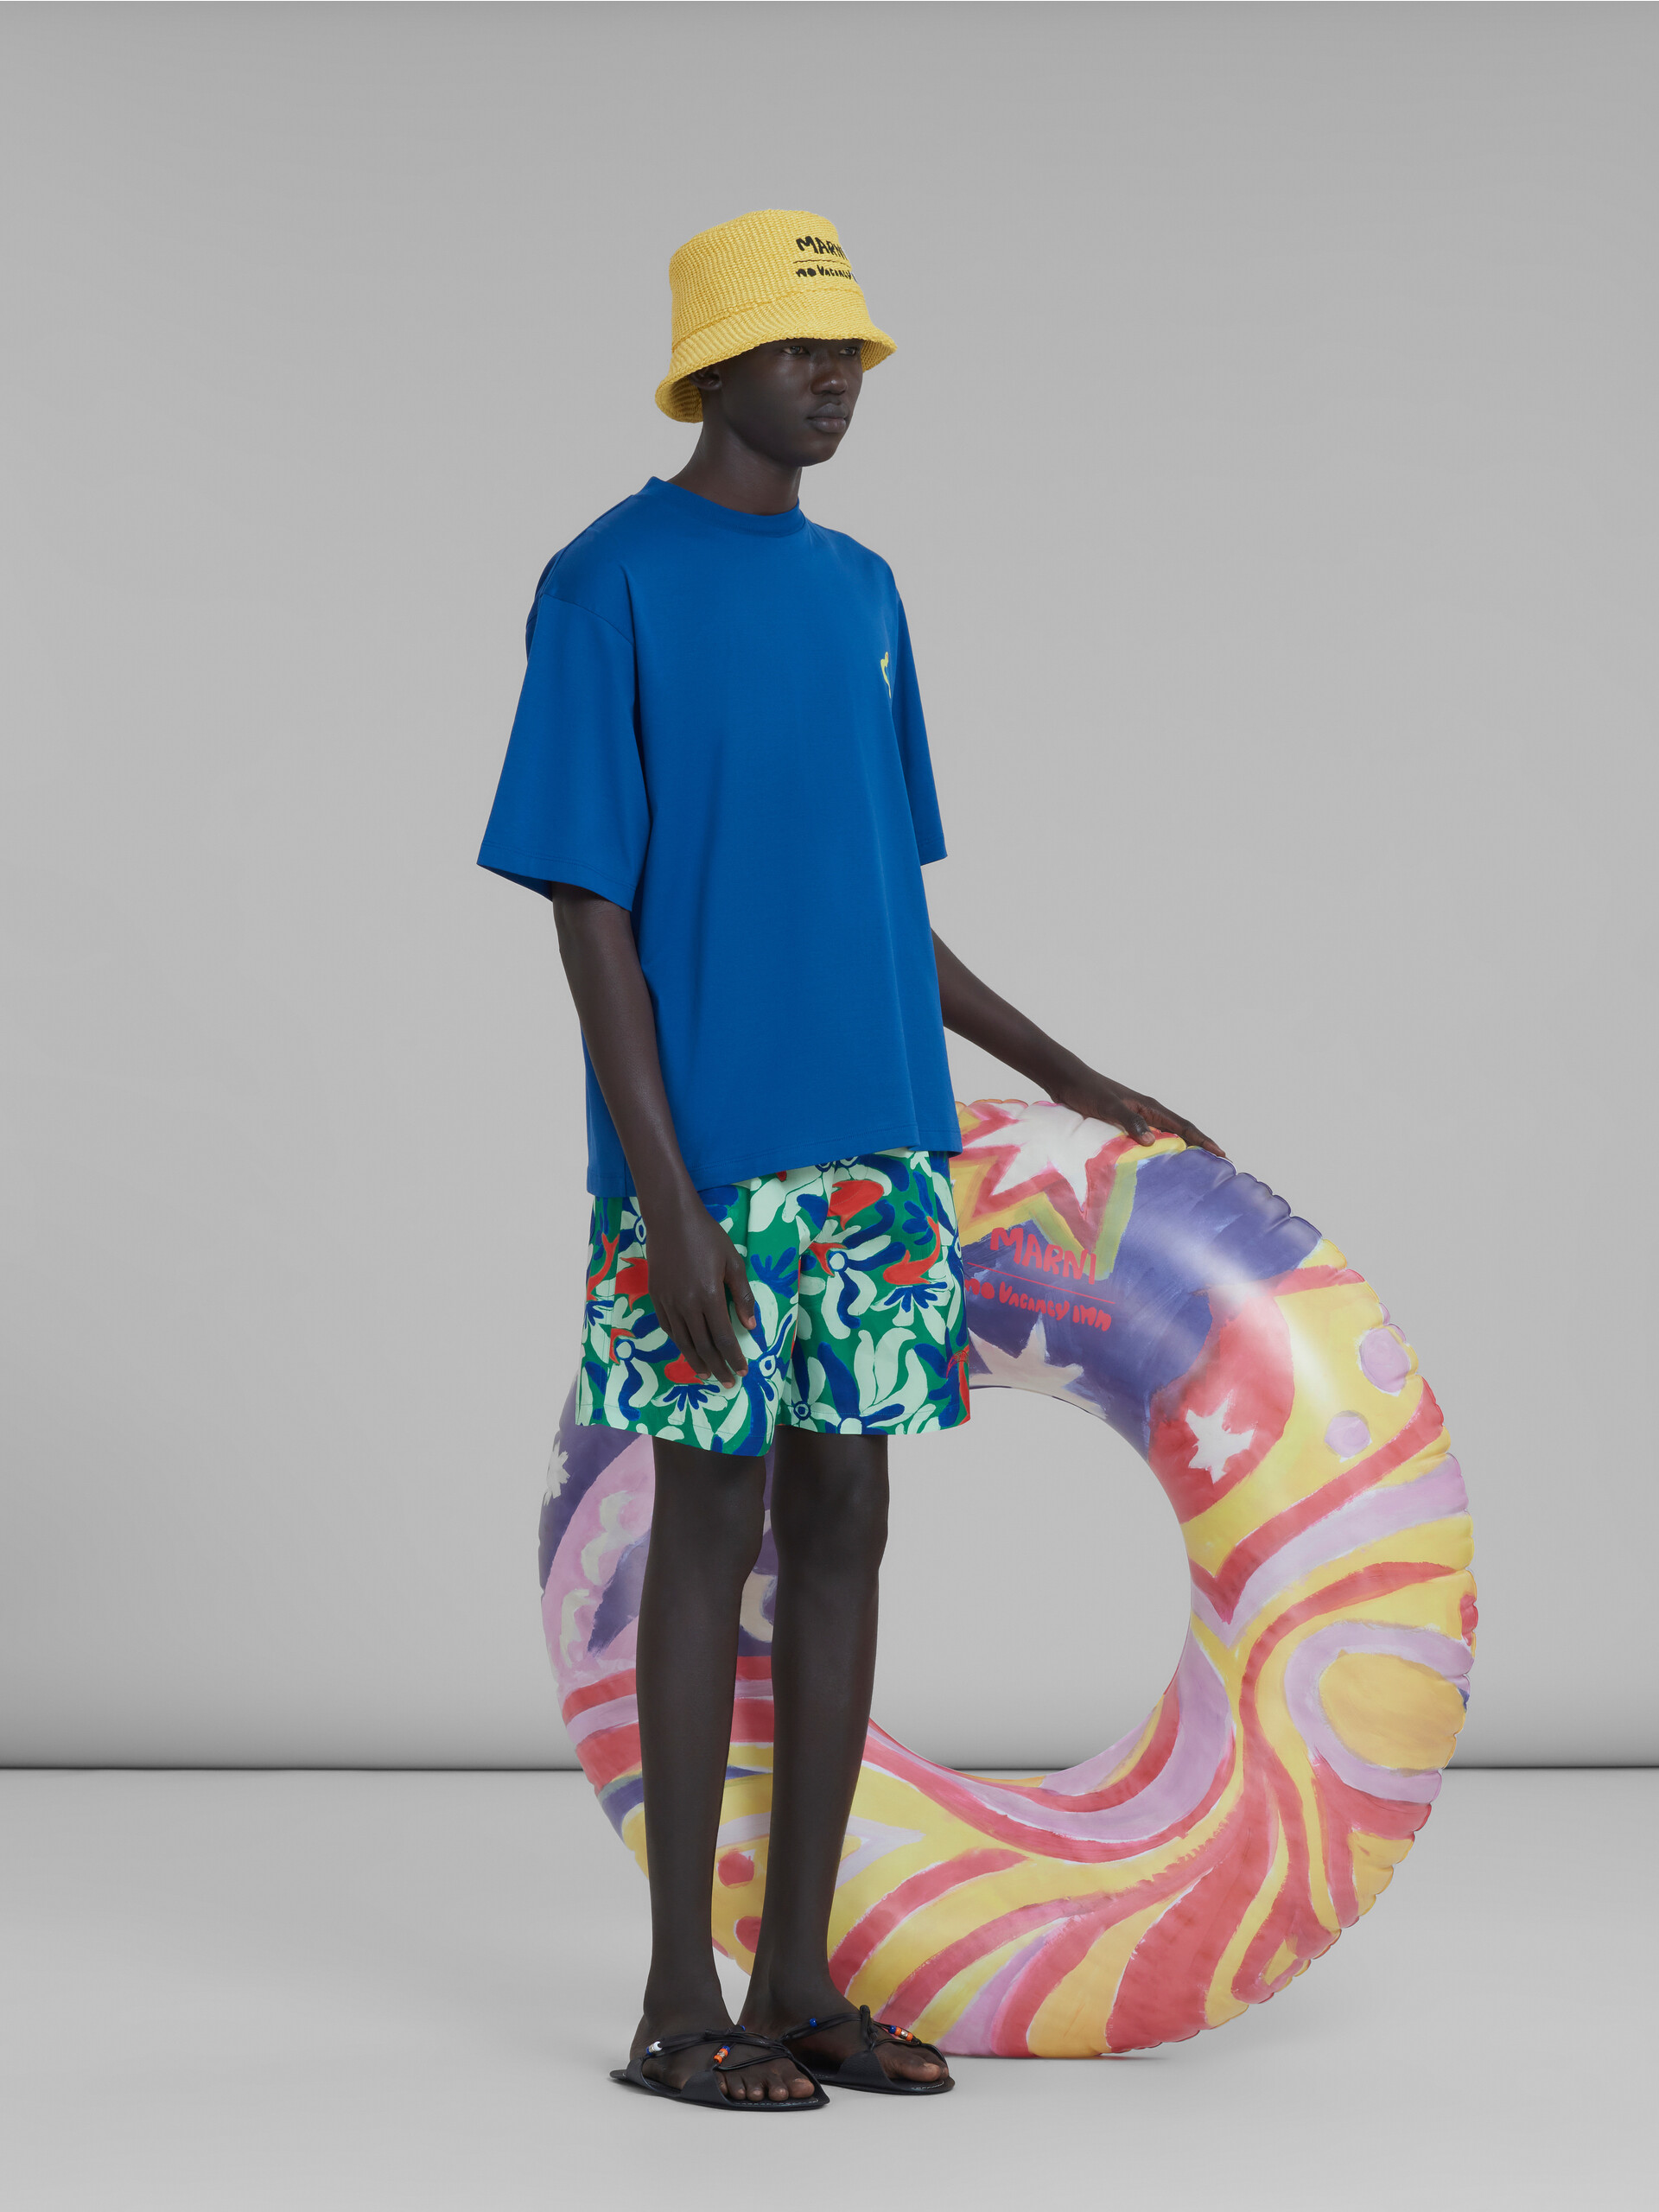 Marni x No Vacancy Inn - Inflatable ring with Galactic Paradise print - Other accessories - Image 6